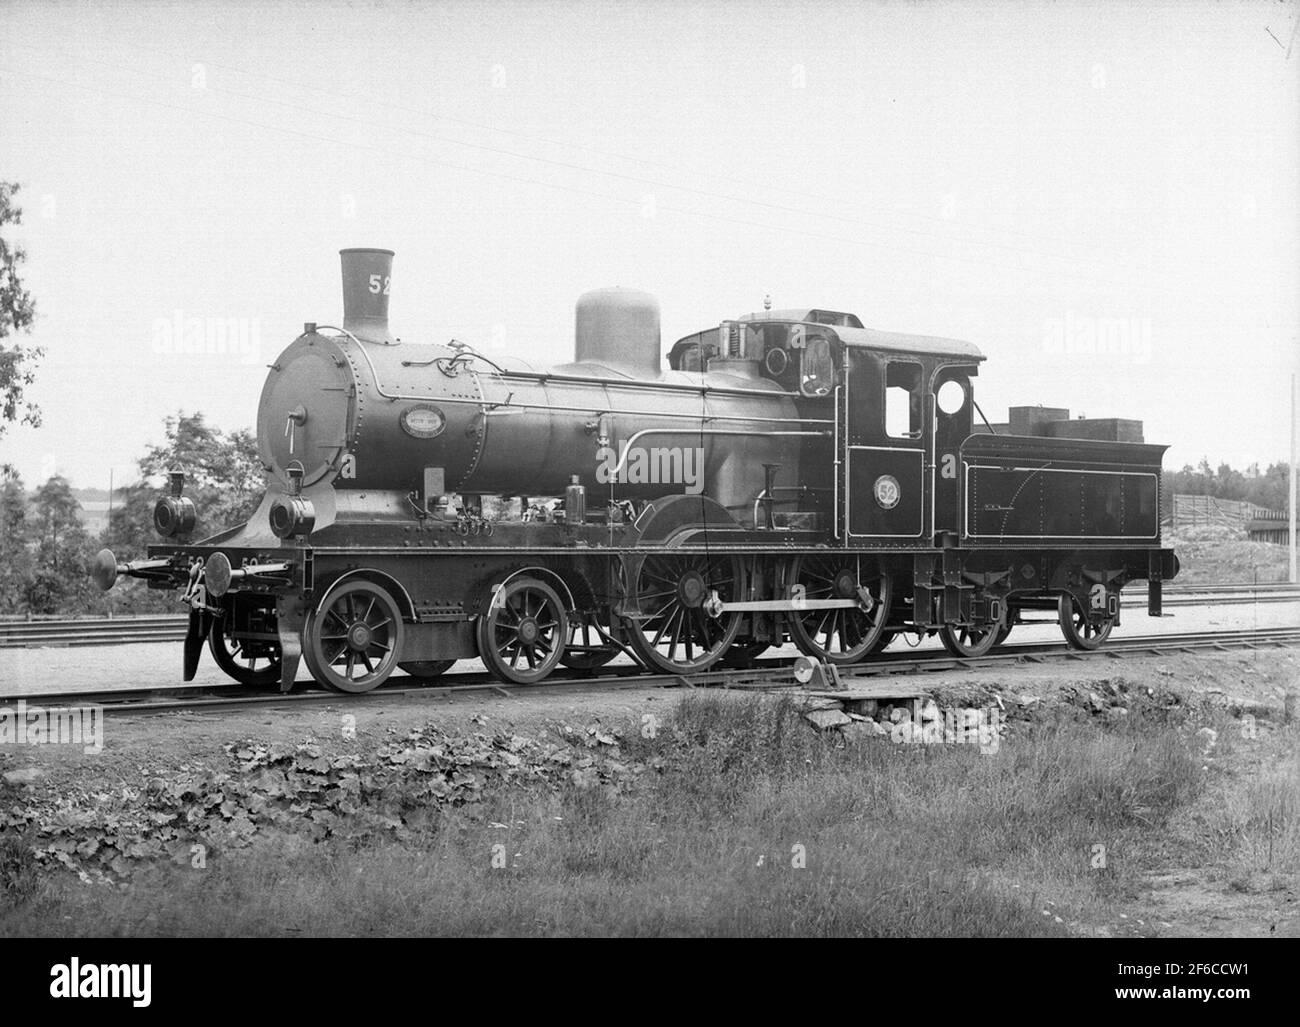 BJ C3 52. Delivery photo. The locomotive was manufactured by Nohab, manufacturing number 775. In 1972, NOHAB's steam club. Stock Photo